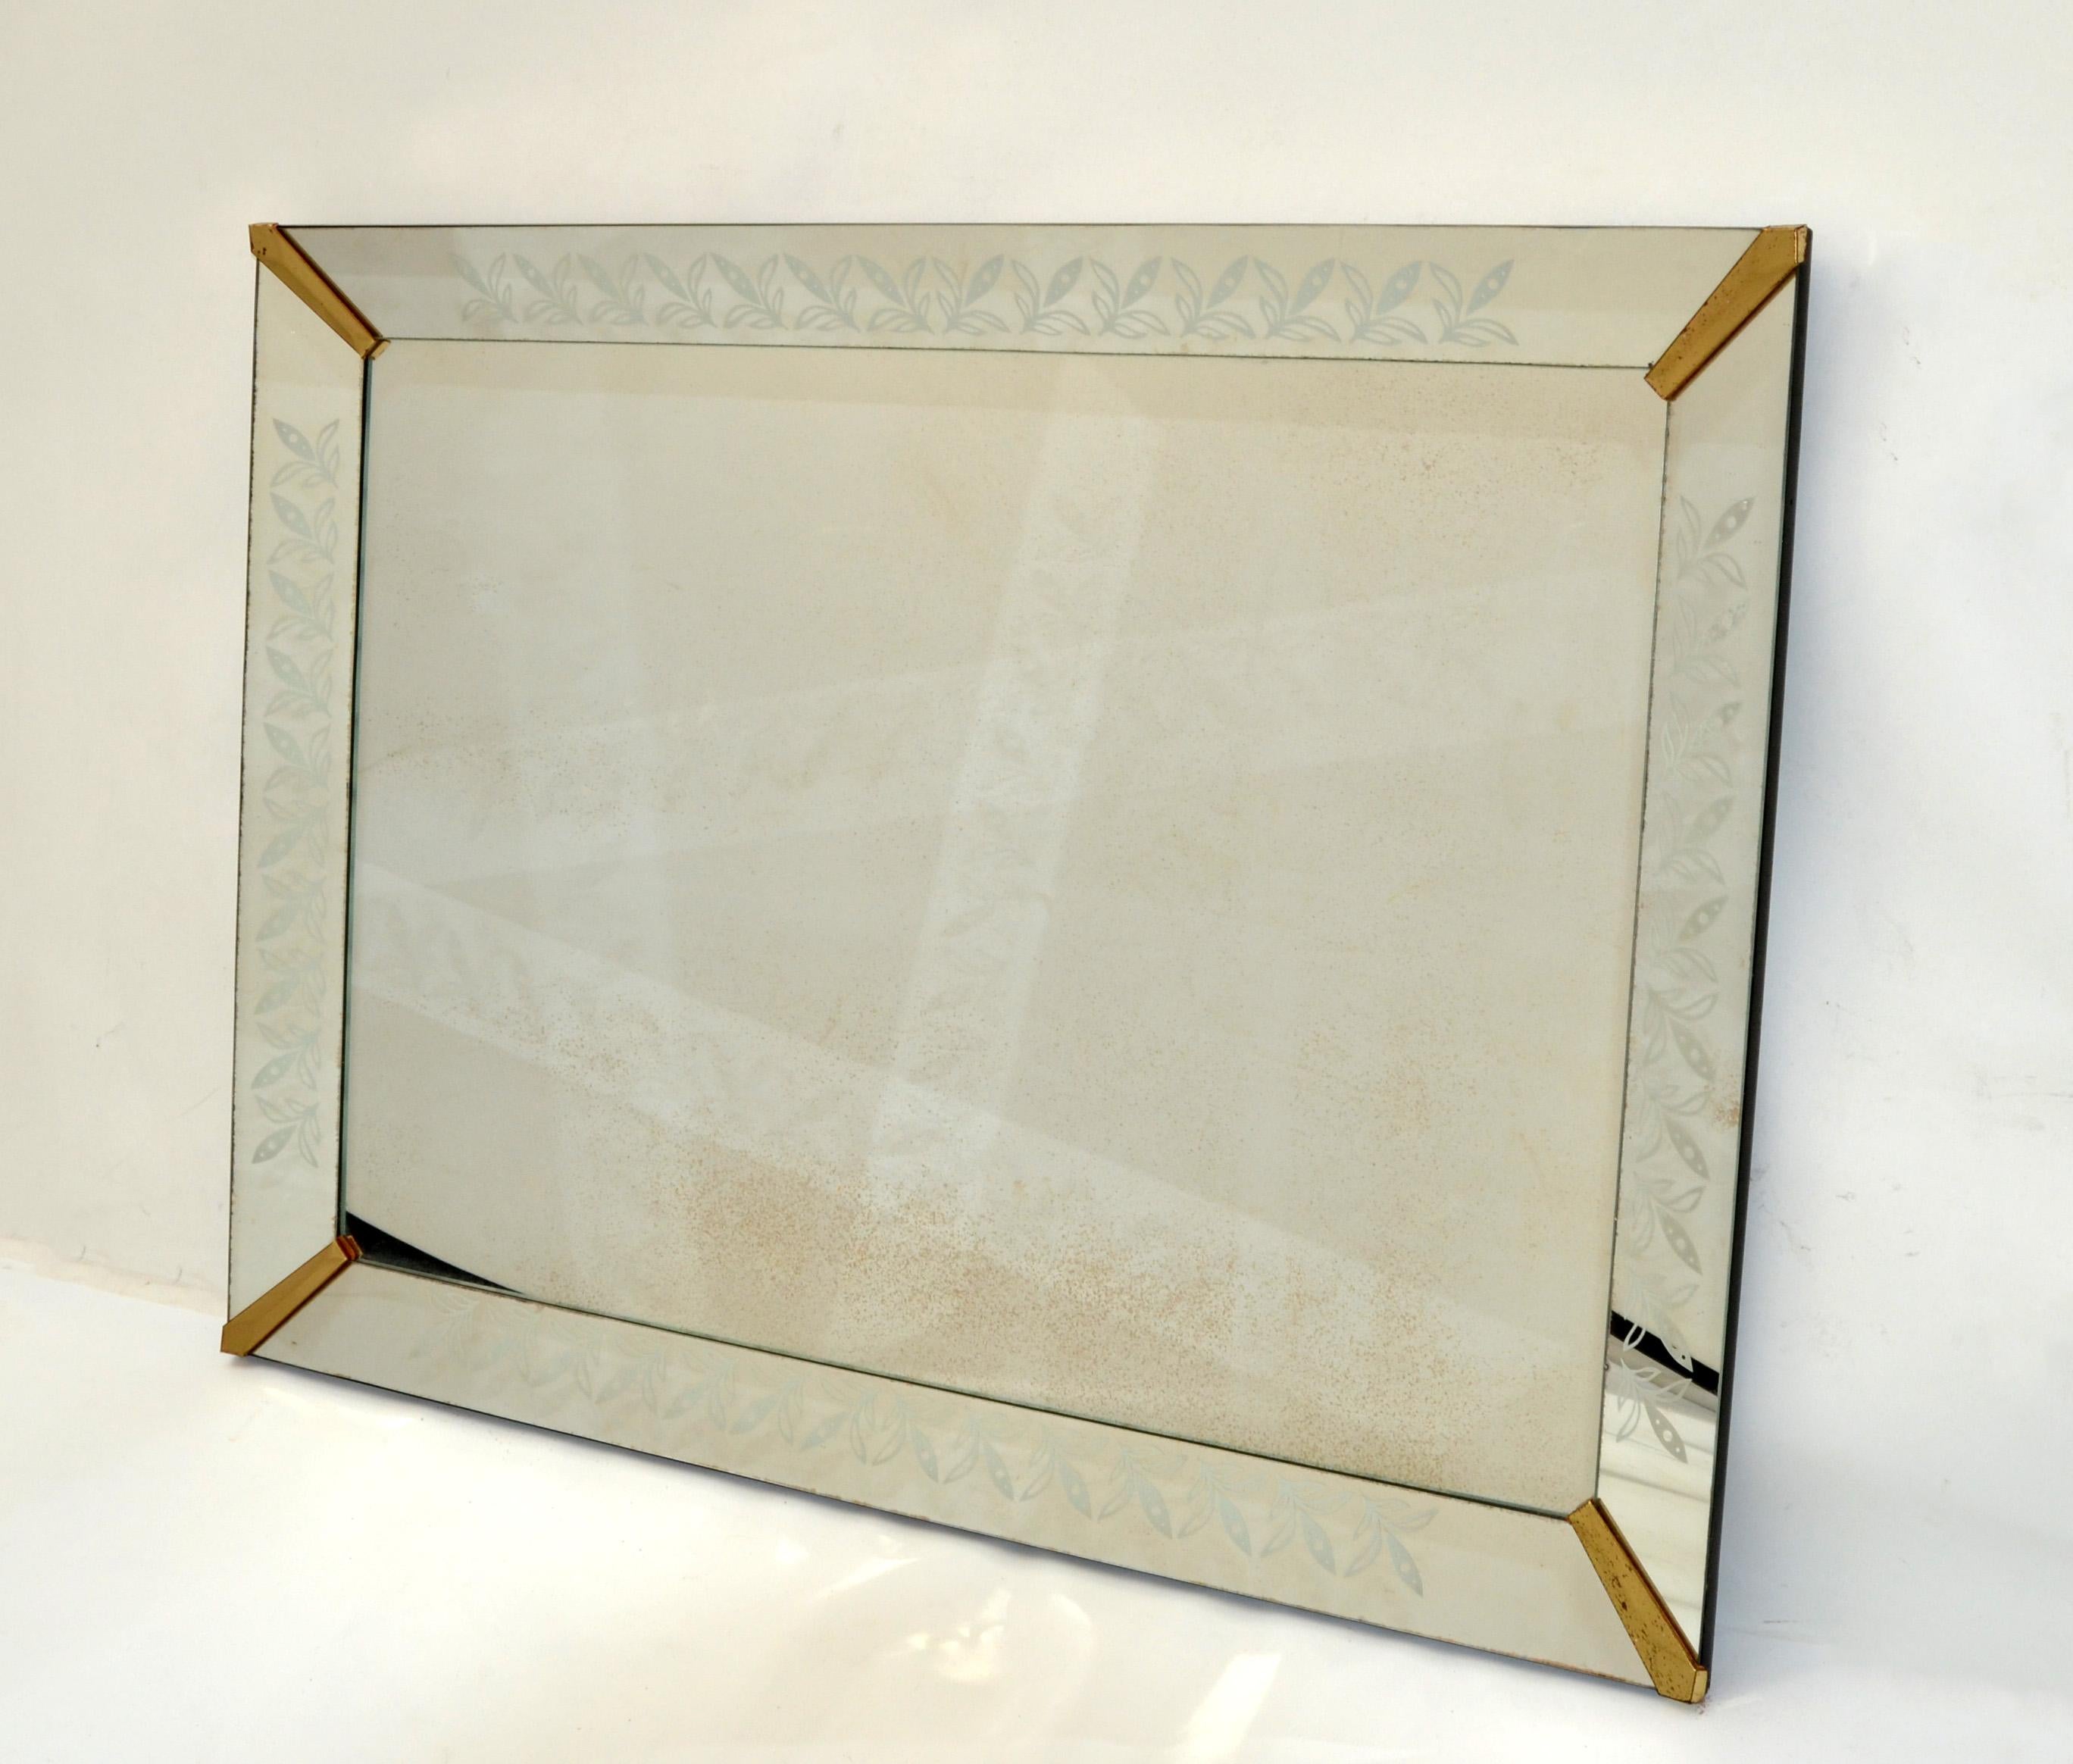 Italian 1940s Art Deco Venetian Style Etched Wall Mirror with Brass Finished Corners